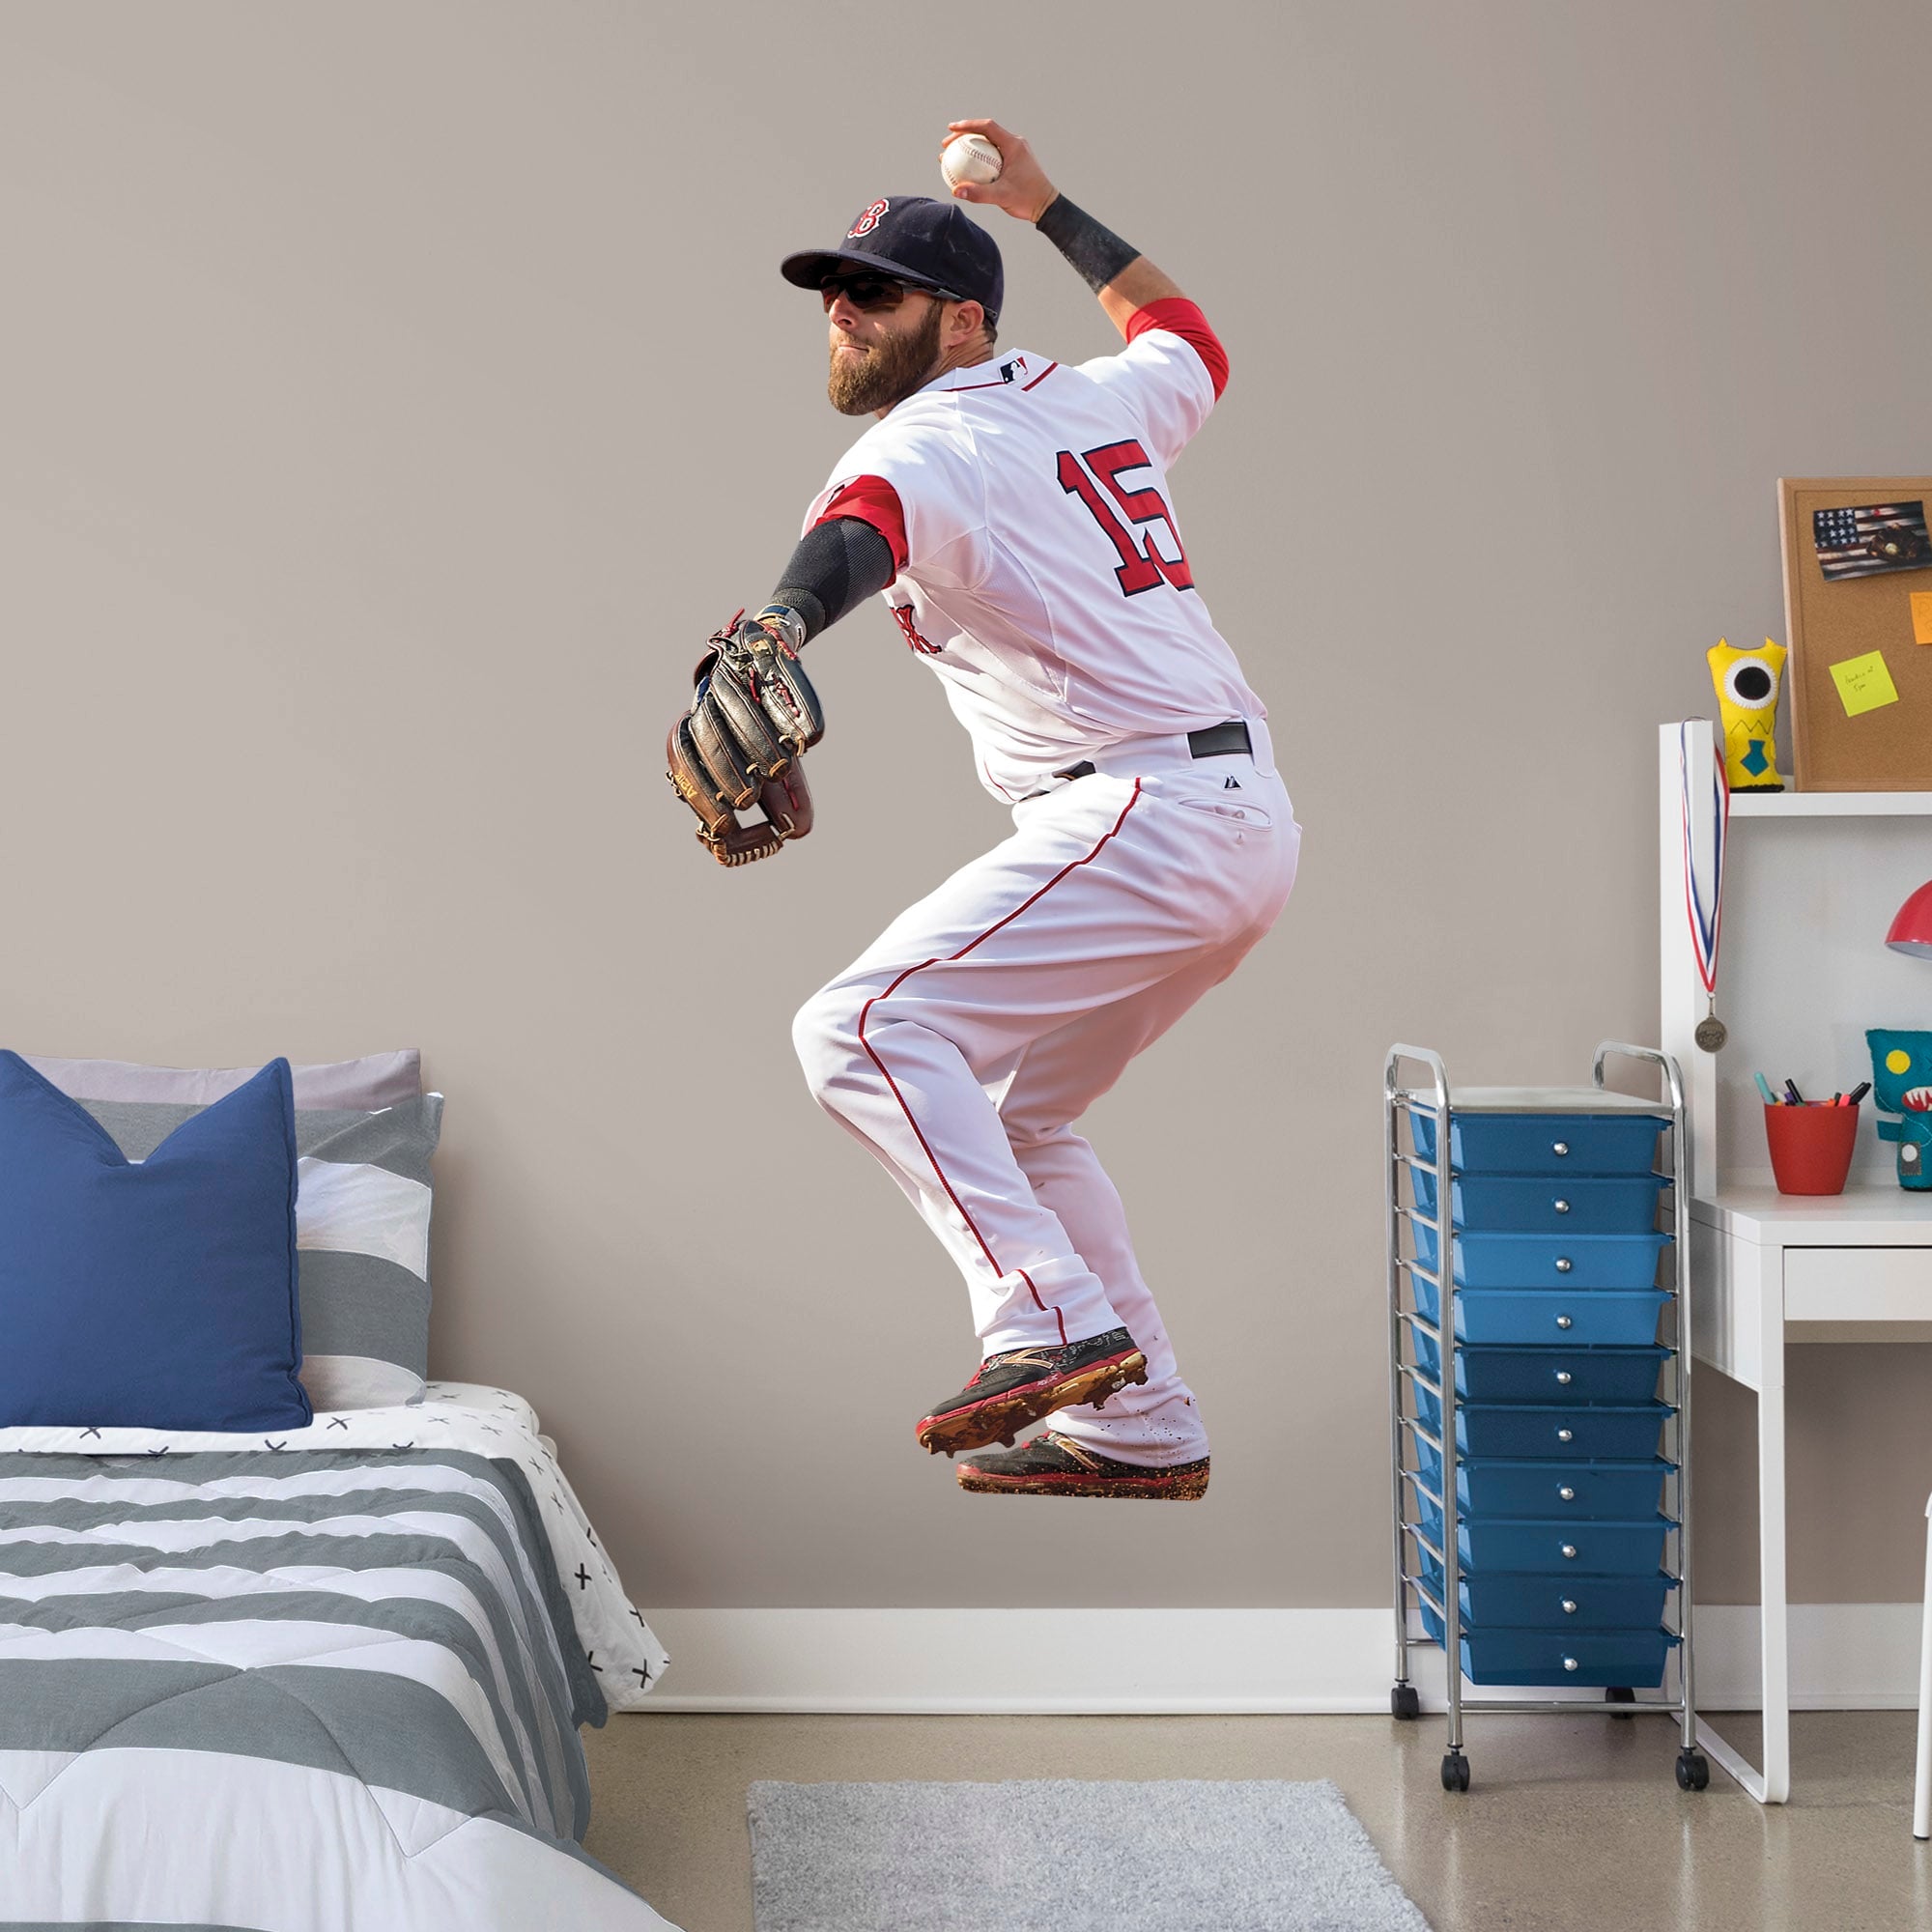 Dustin Pedroia for Boston Red Sox: Throwing - Officially Licensed MLB Removable Wall Decal XL by Fathead | Vinyl